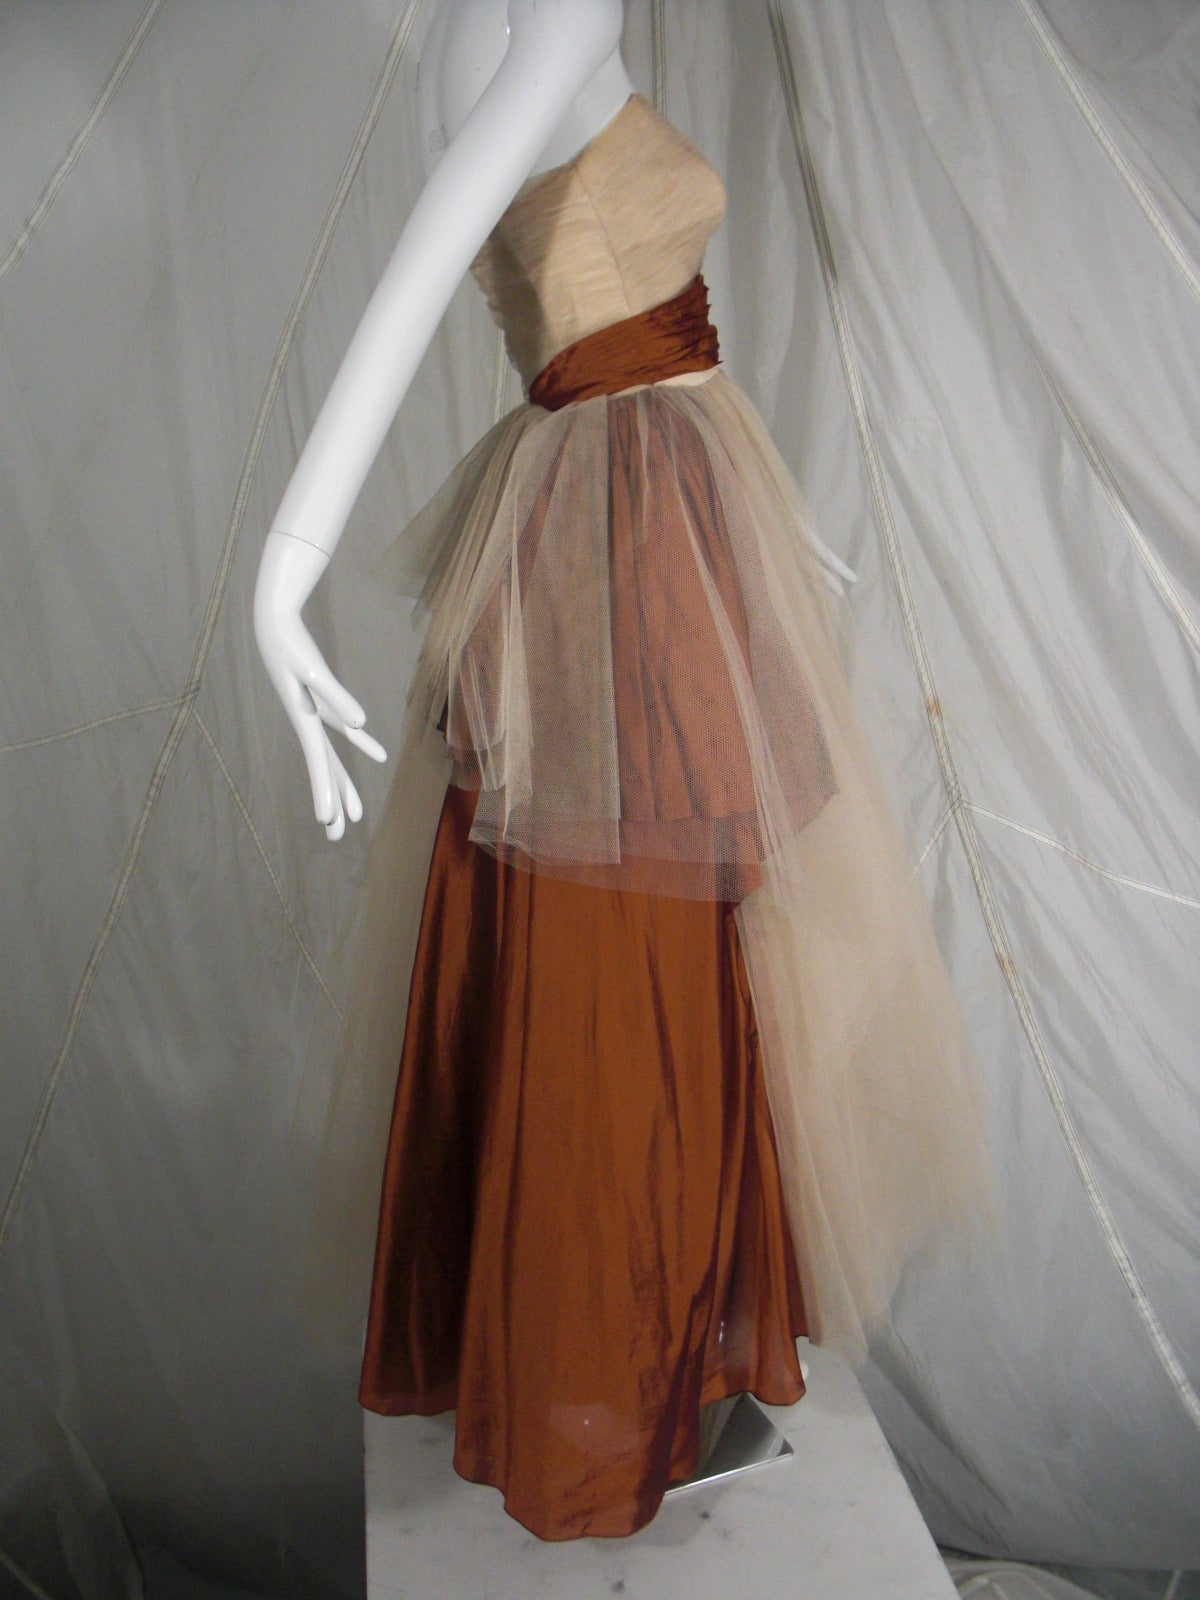 1950s Will Steinman Tulle and Silk Ball Gown

Stylized Bronze Silk Sash at Waist and Side

Boned Bodice and Fully Lined